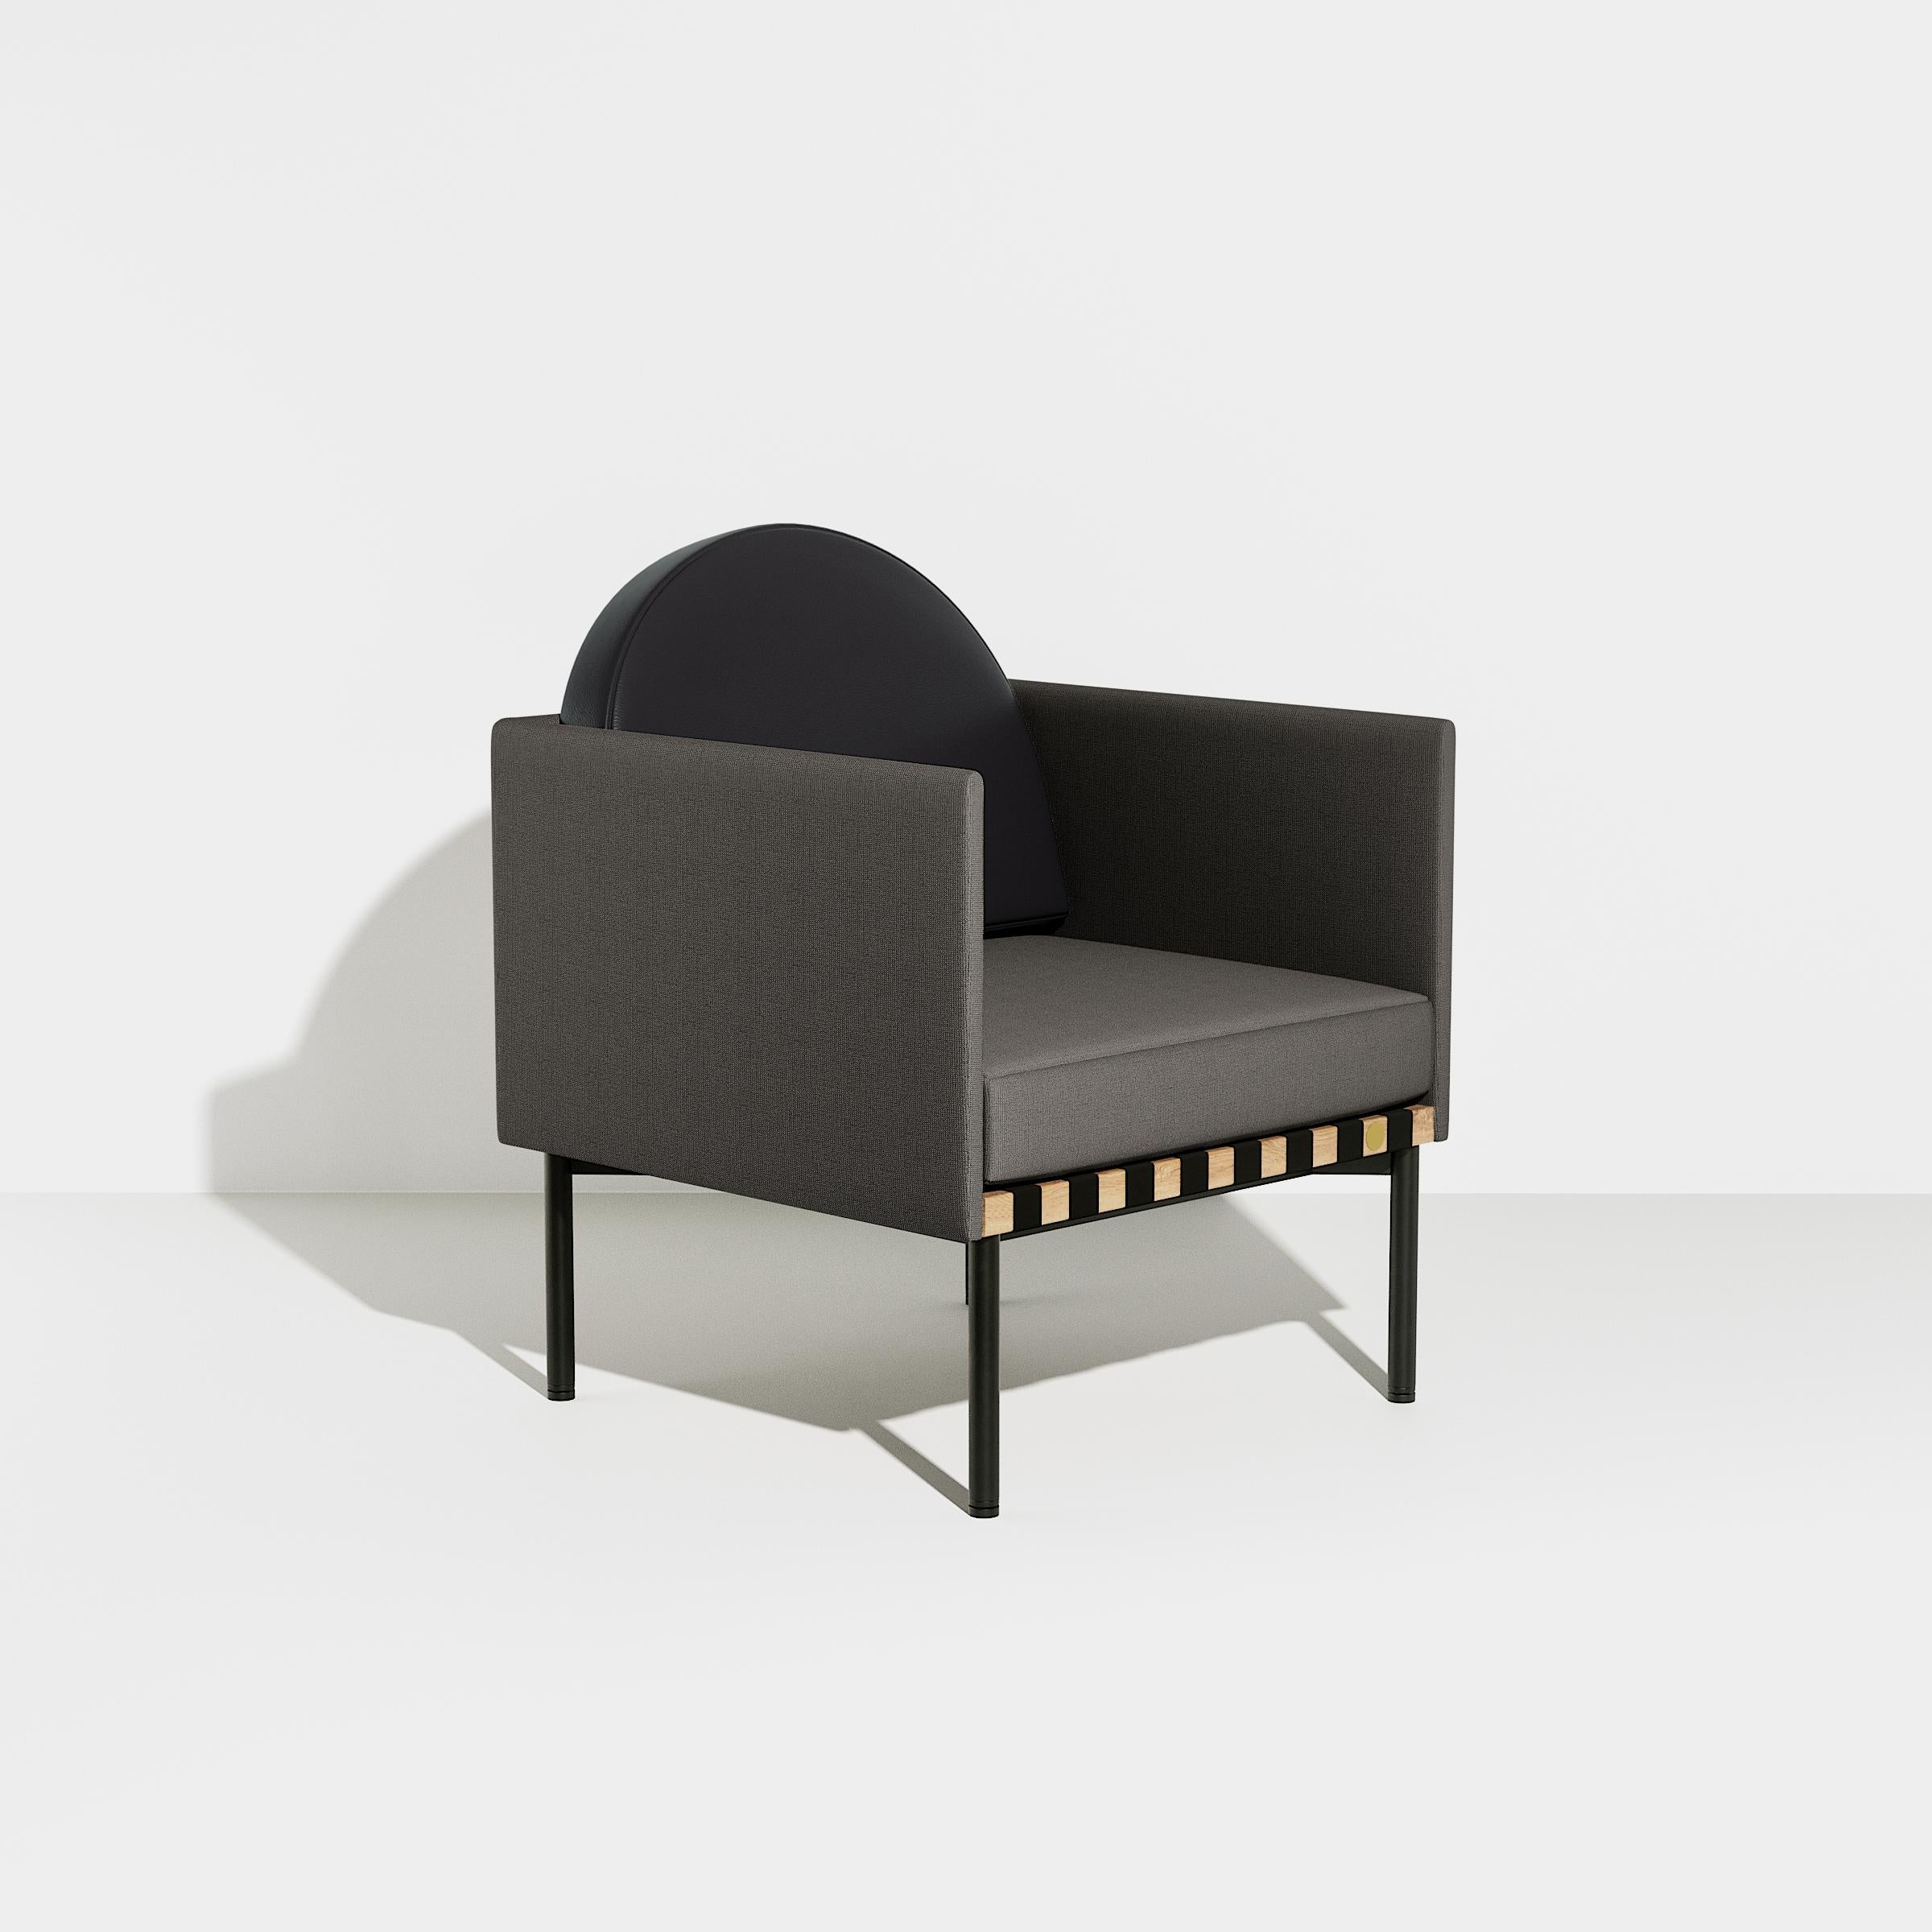 Petite Friture Grid Armchair with Armrest in Grey-black by Studio Pool, 2016

Pool designed the Grid collection in reference to the Bauhaus style and in honour of the graphic talents. Each element of this all-modular system retains the identity of